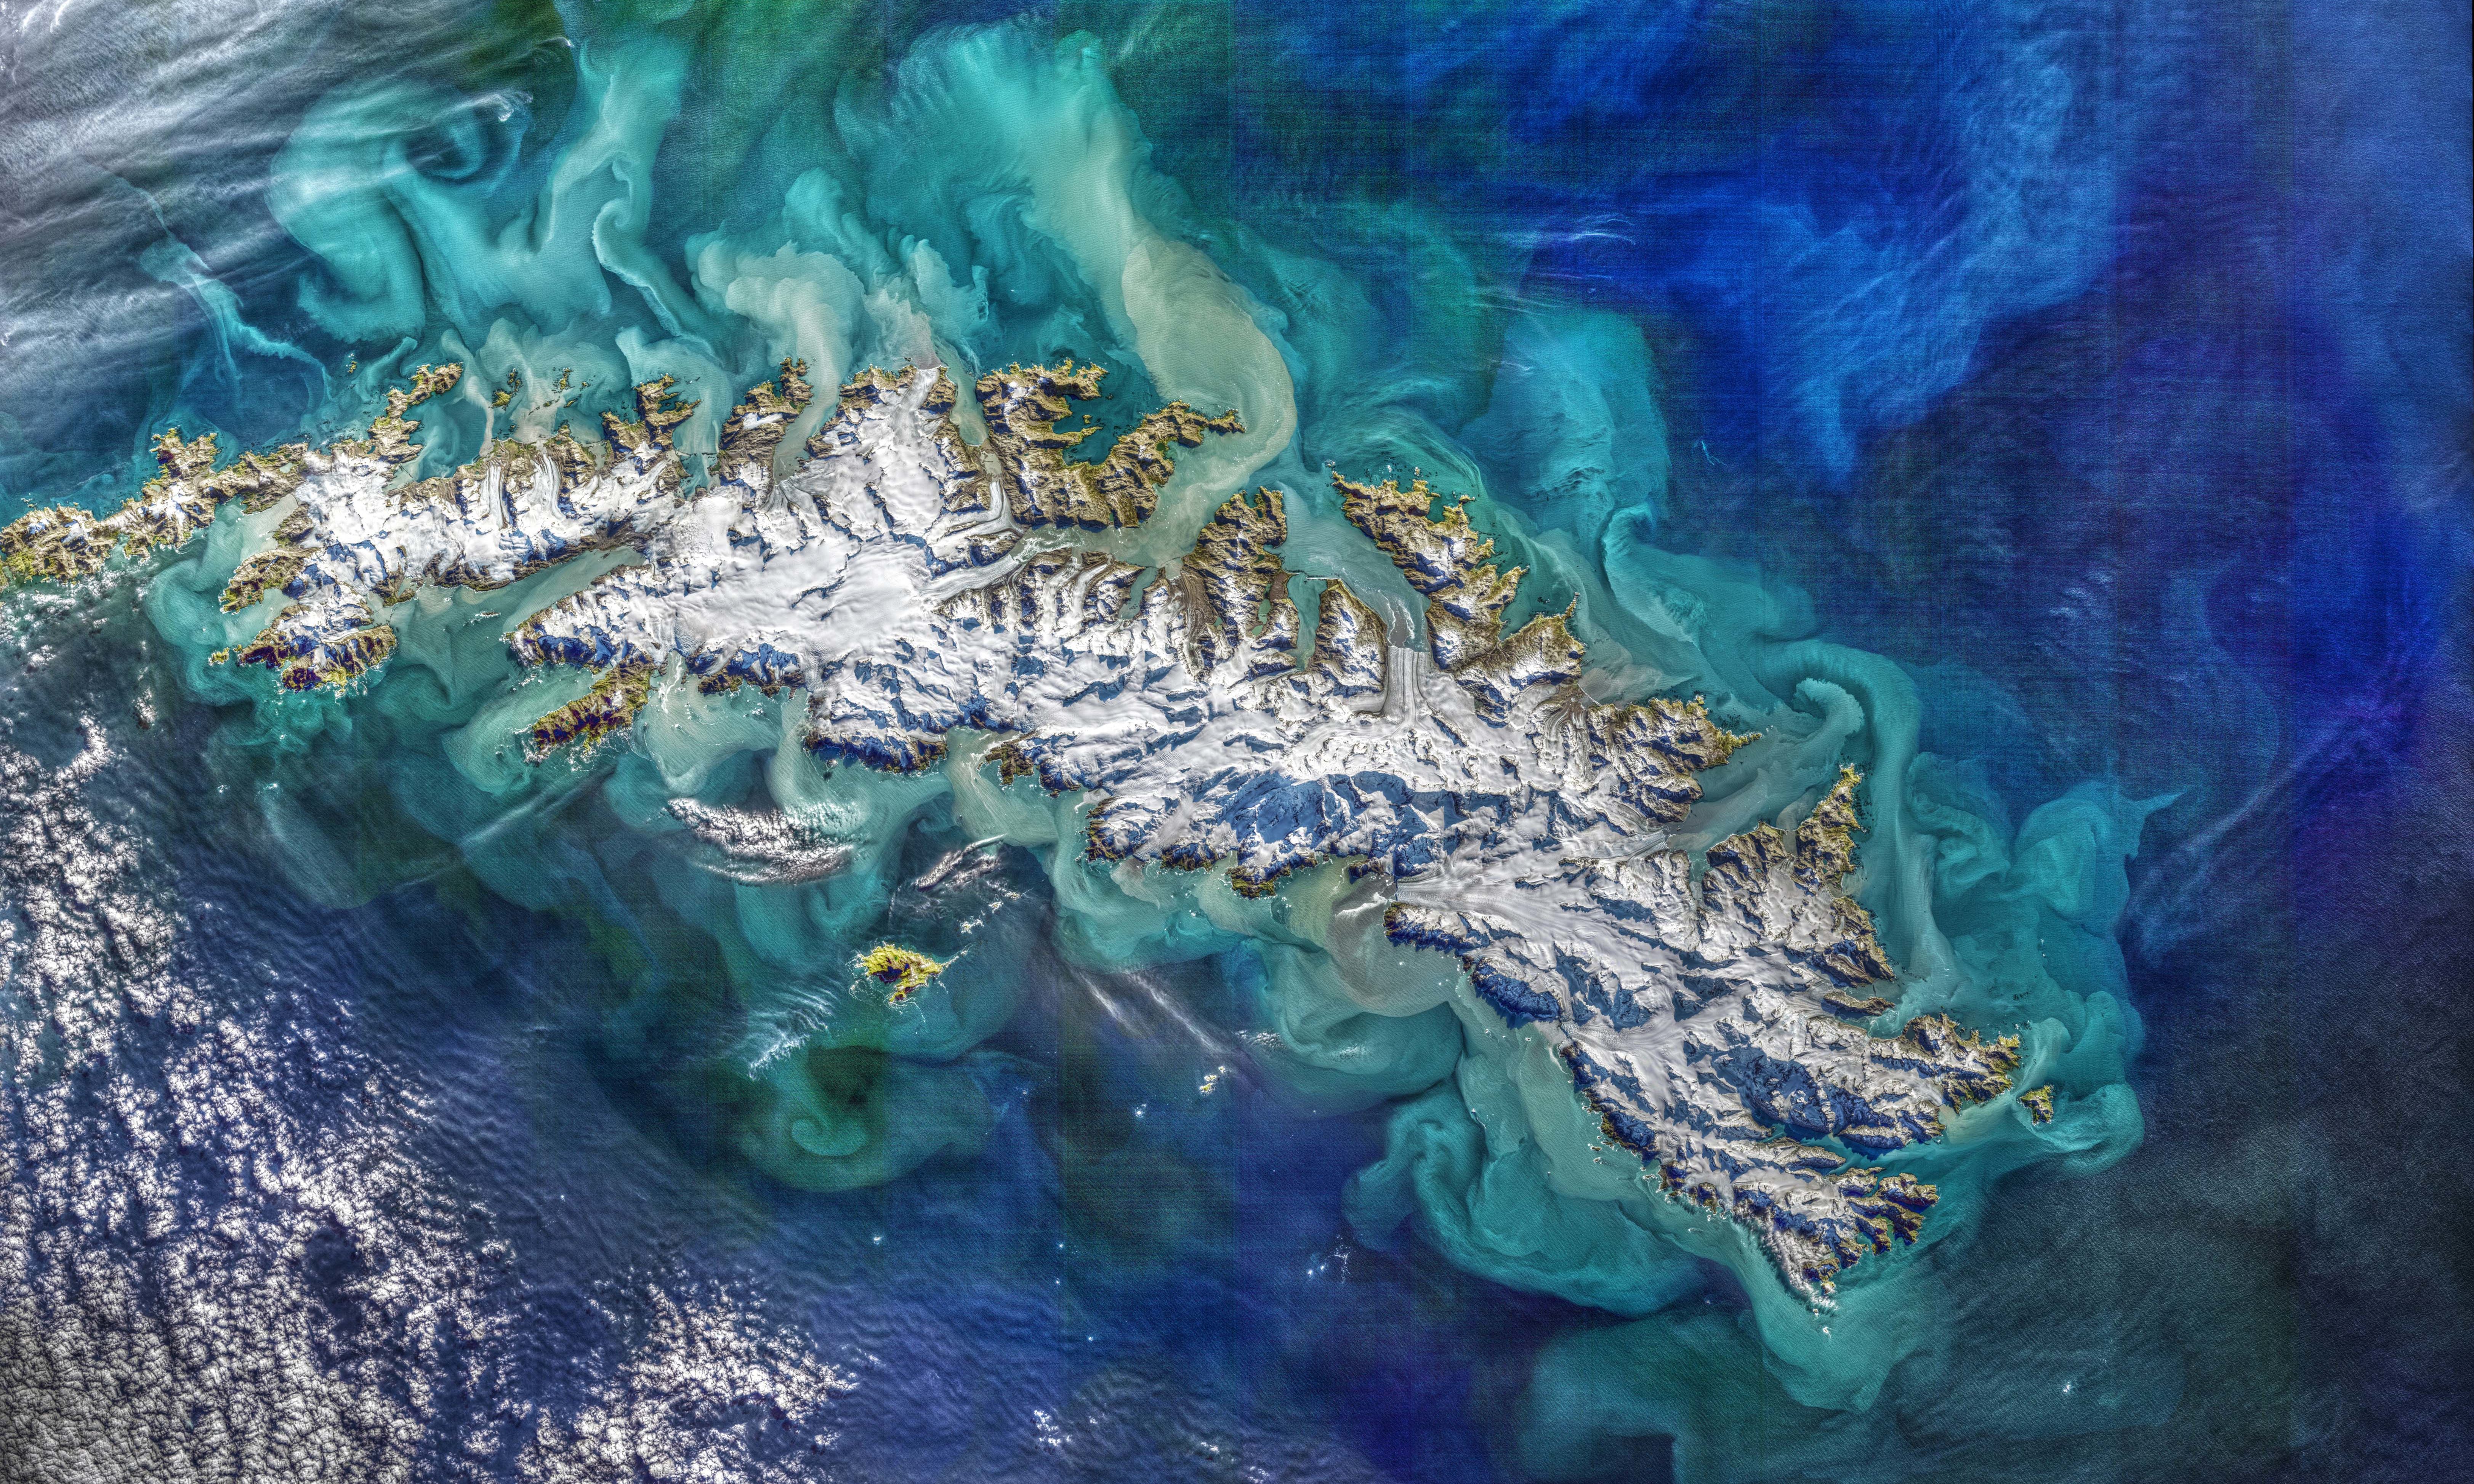 South Georgia Island from space, showing the sea-ending glaciers and their nutrients/sediments flowing into the South Atlantic